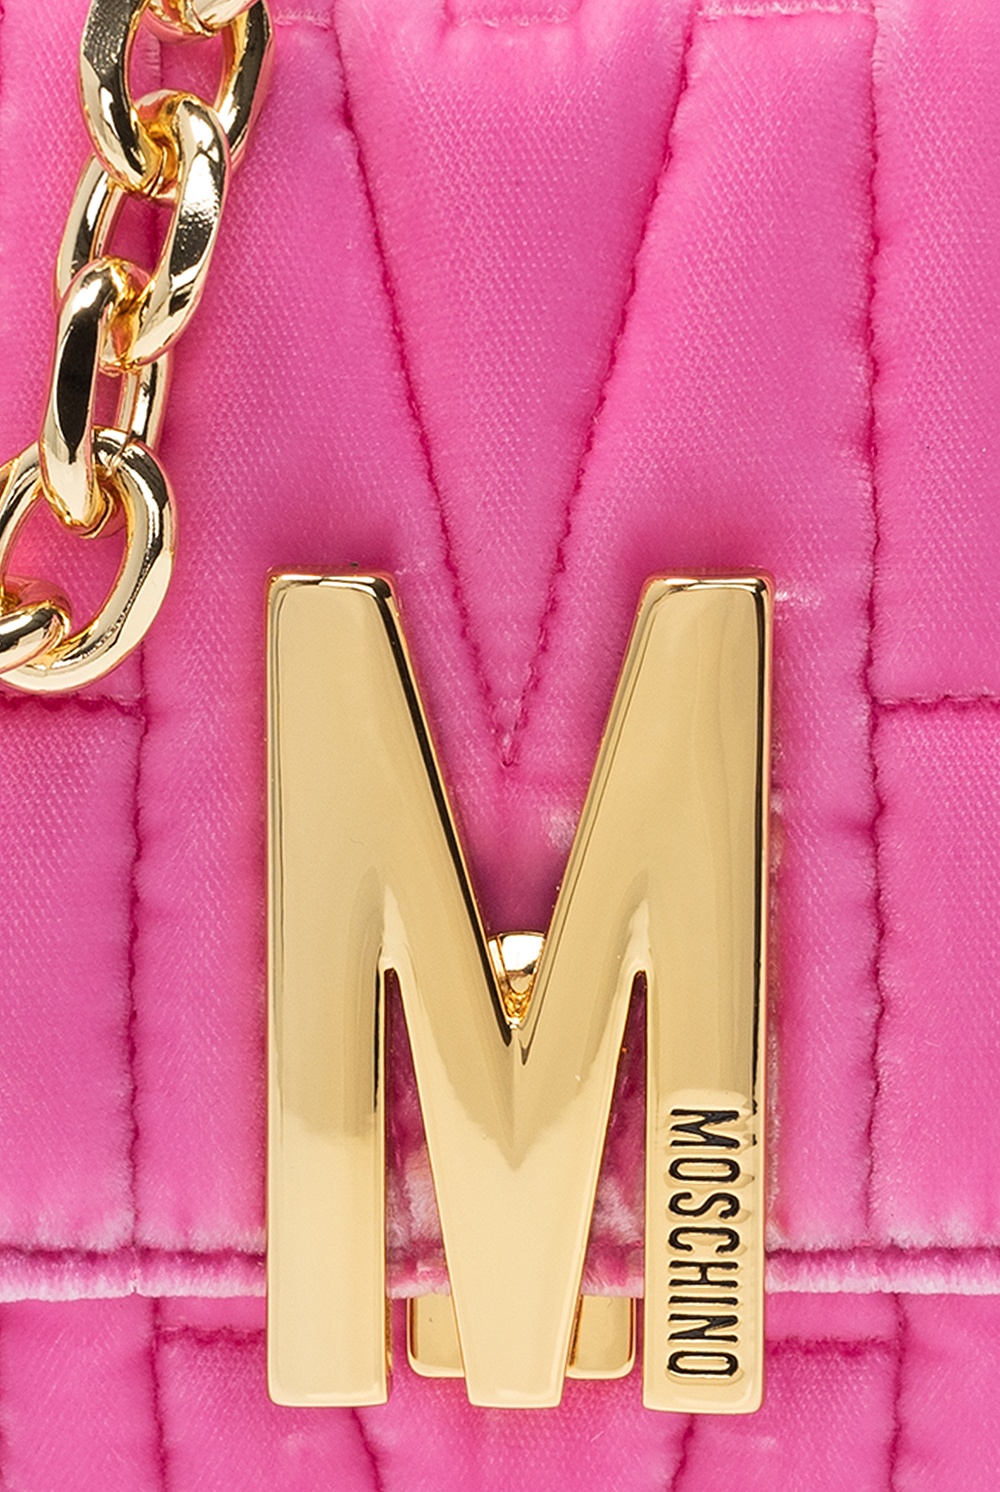 M Quilted shoulder bag  Moschino Official Store